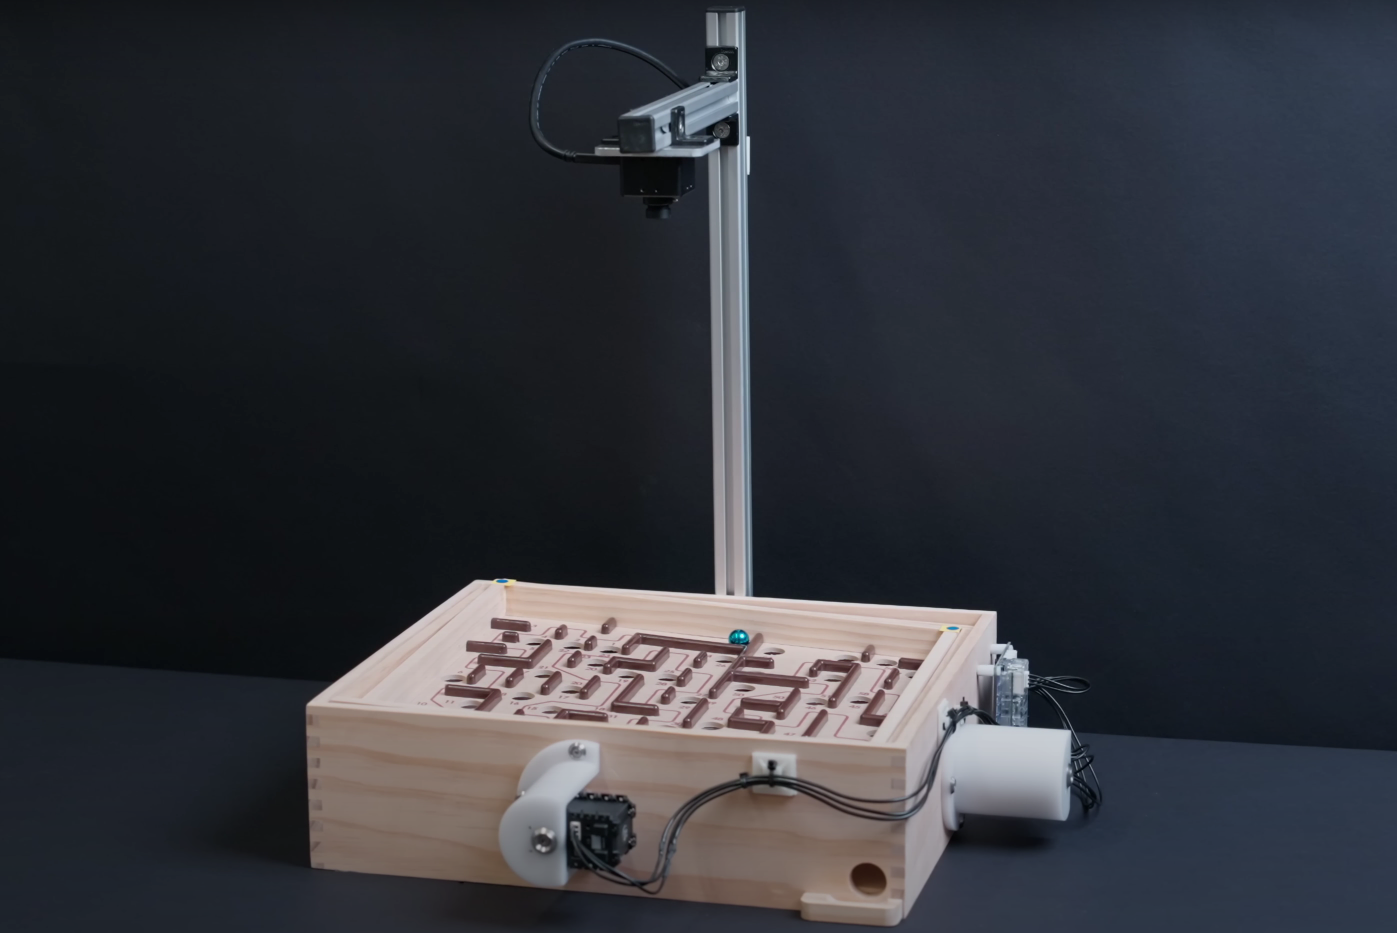 Artificial intelligence breaks the world record in the wooden balancing game Labyrinth